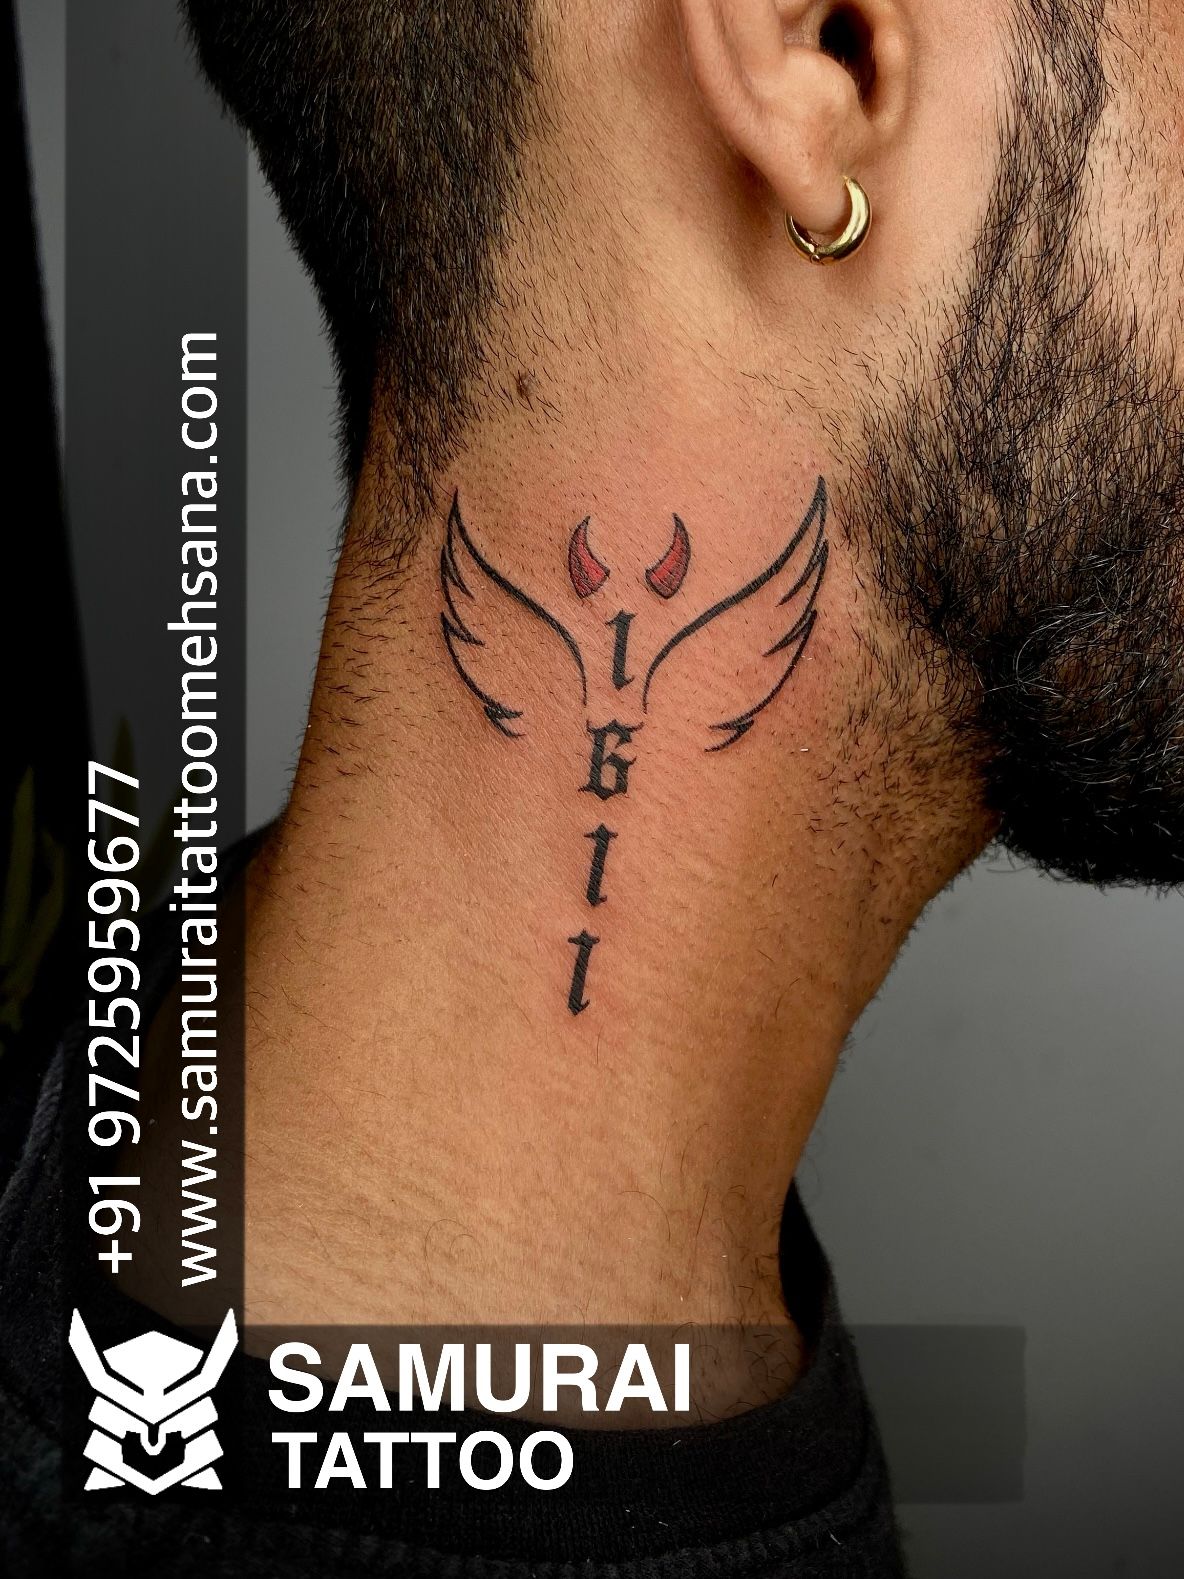 Six-6 Number Tattoo Designs - Page 3 of 4 - Tattoos with Names